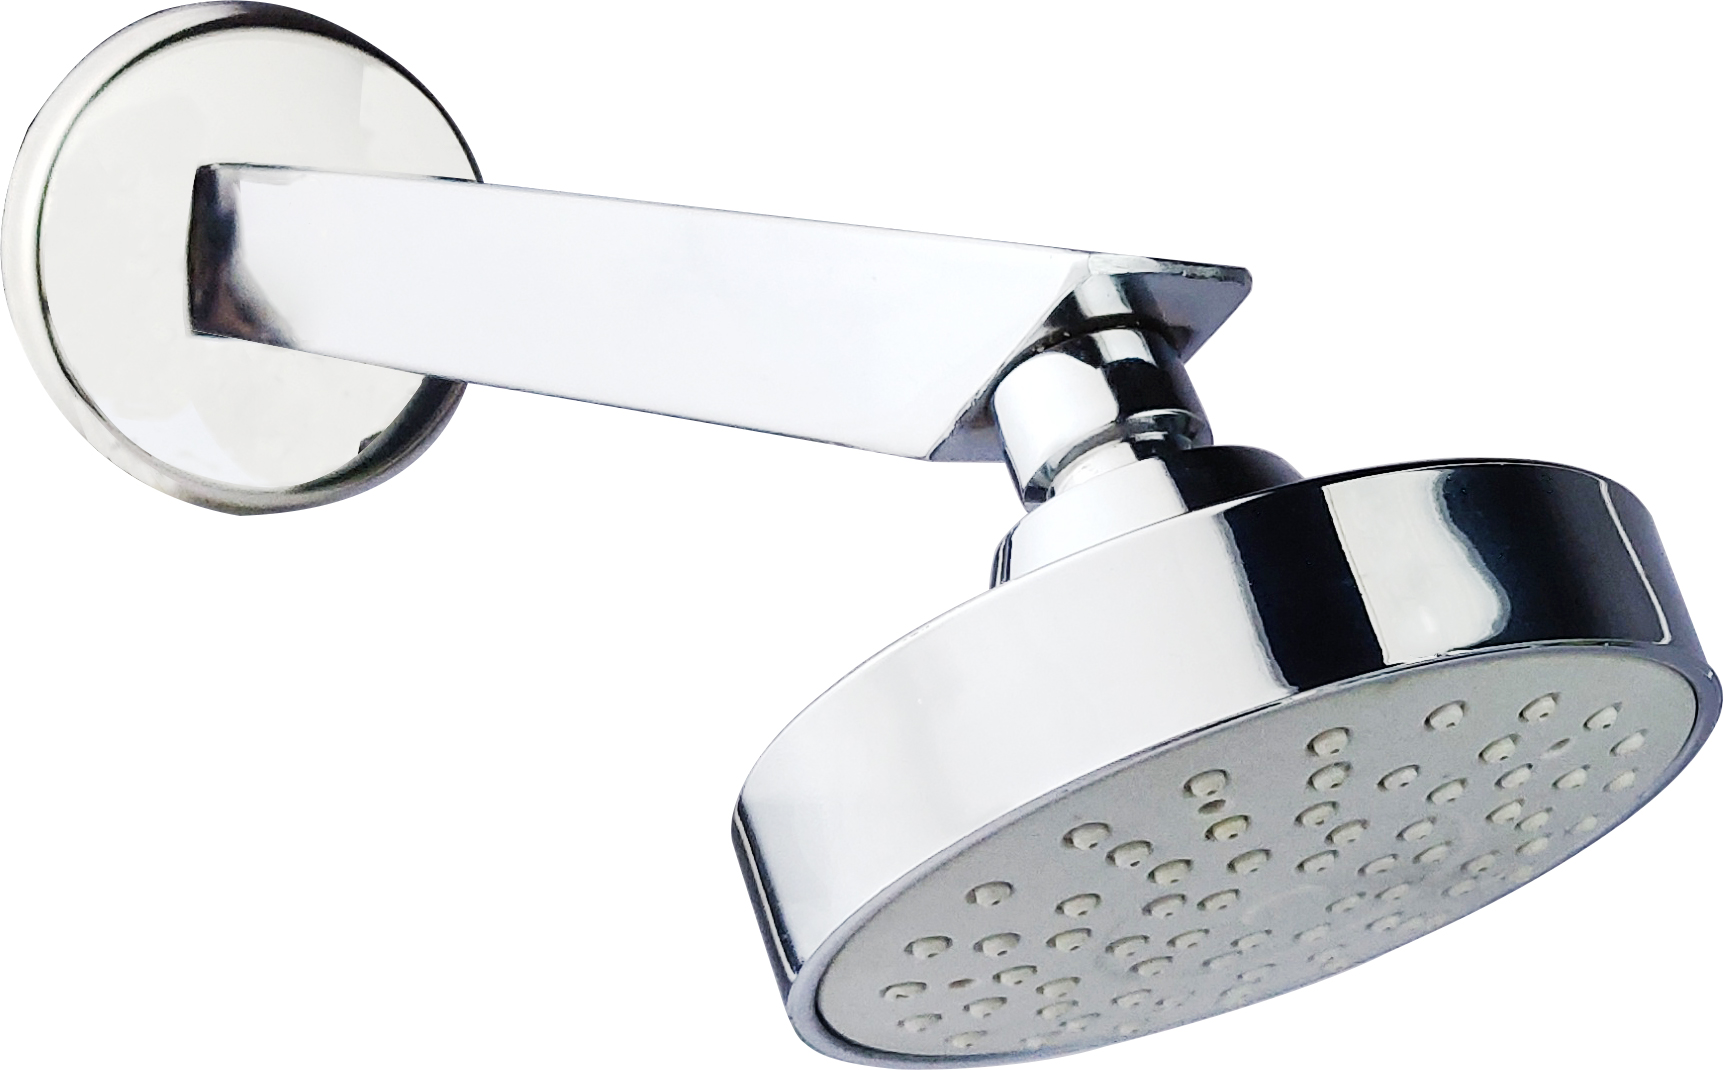 Overhead Shower Finn with 9 Inch Square arm